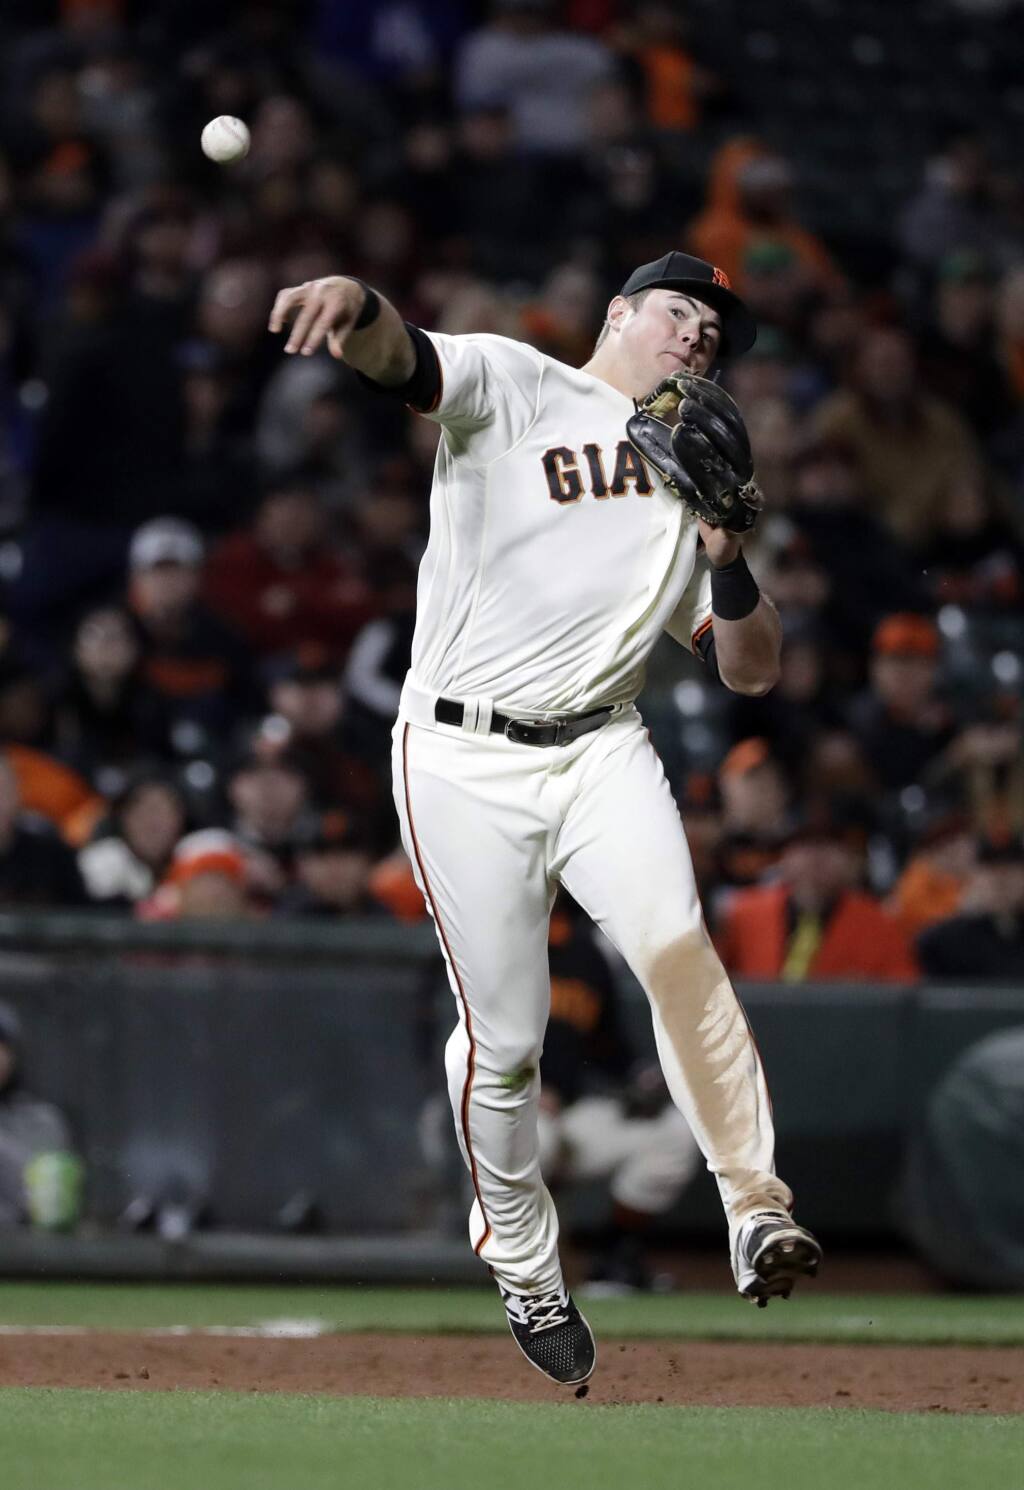 Nevius: Rookie Christian Arroyo is a jolt of high energy for the Giants